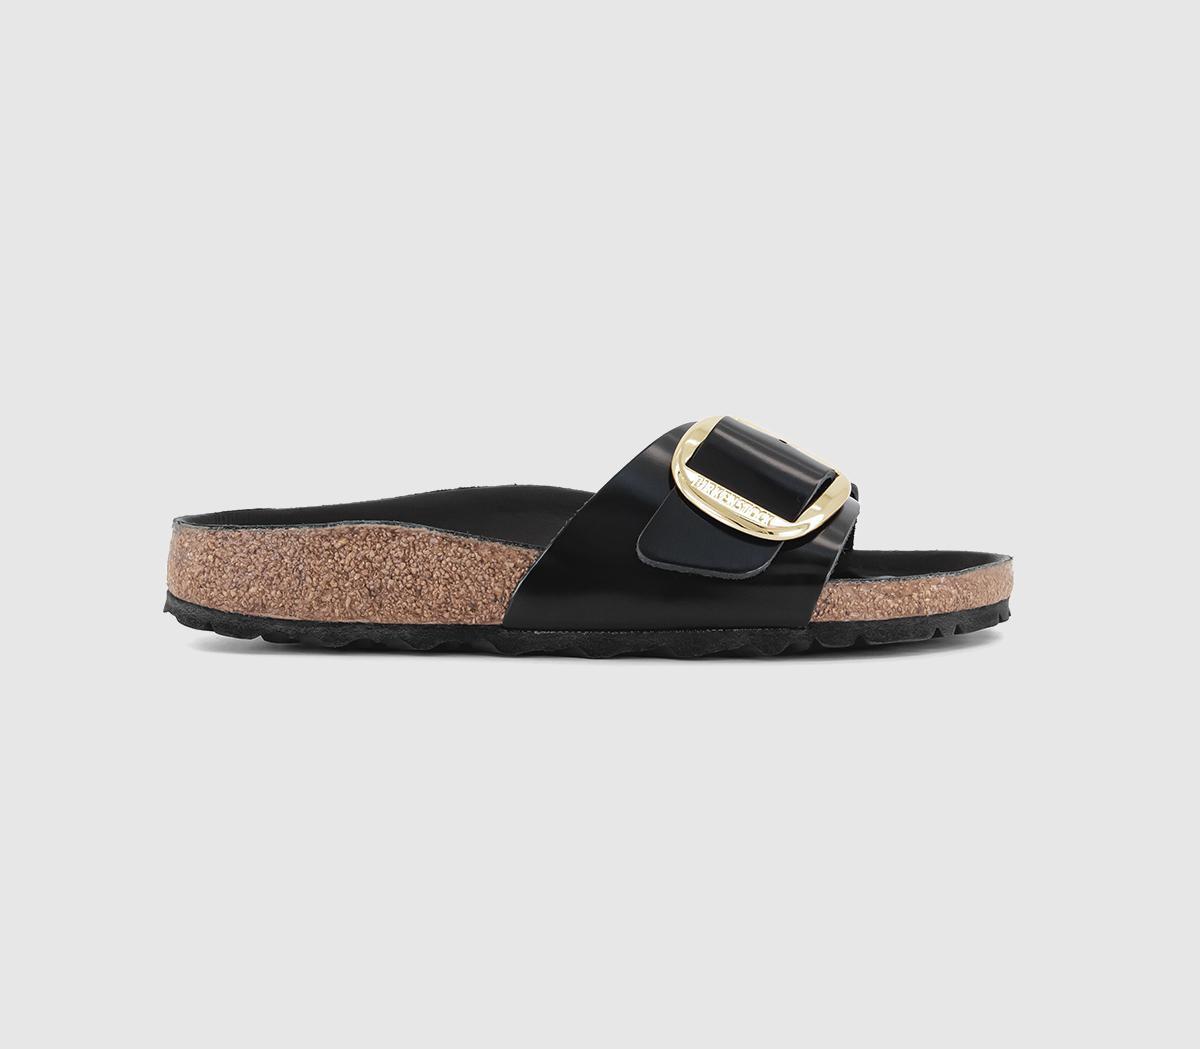 Madrid Big Buckle Sandals High Shine Black Mixed Material